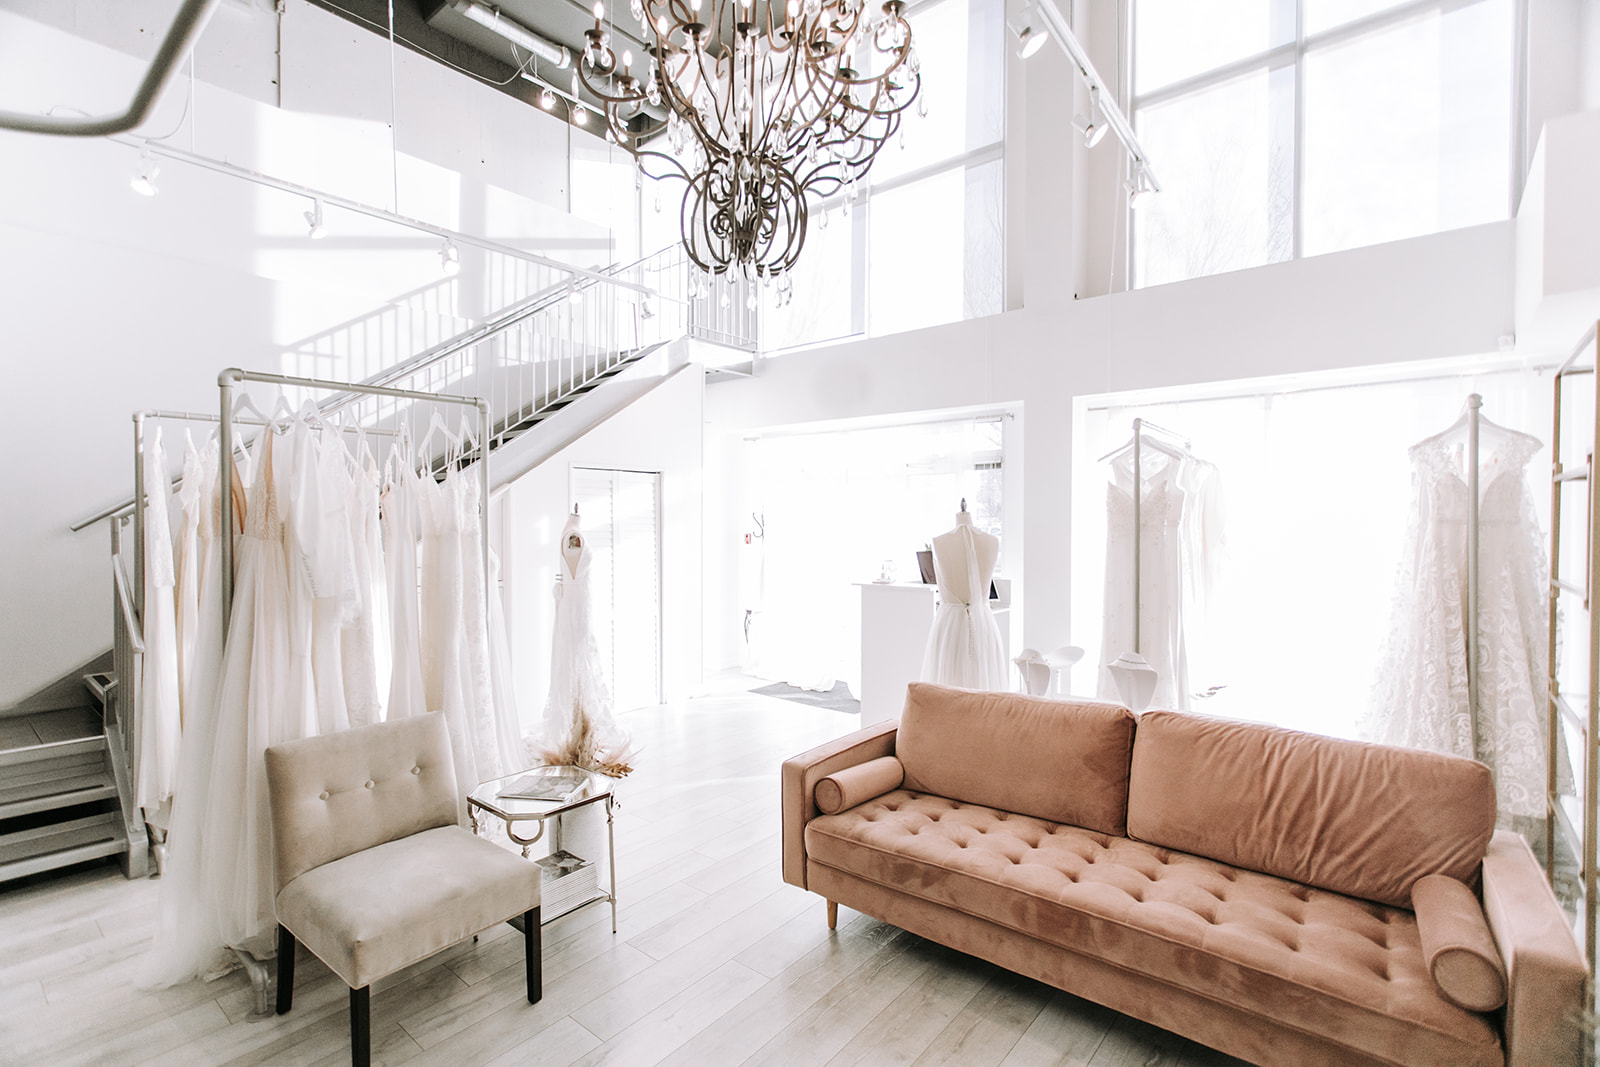 Showroom at the Blush & Raven bridal boutique in Calgary Alberta